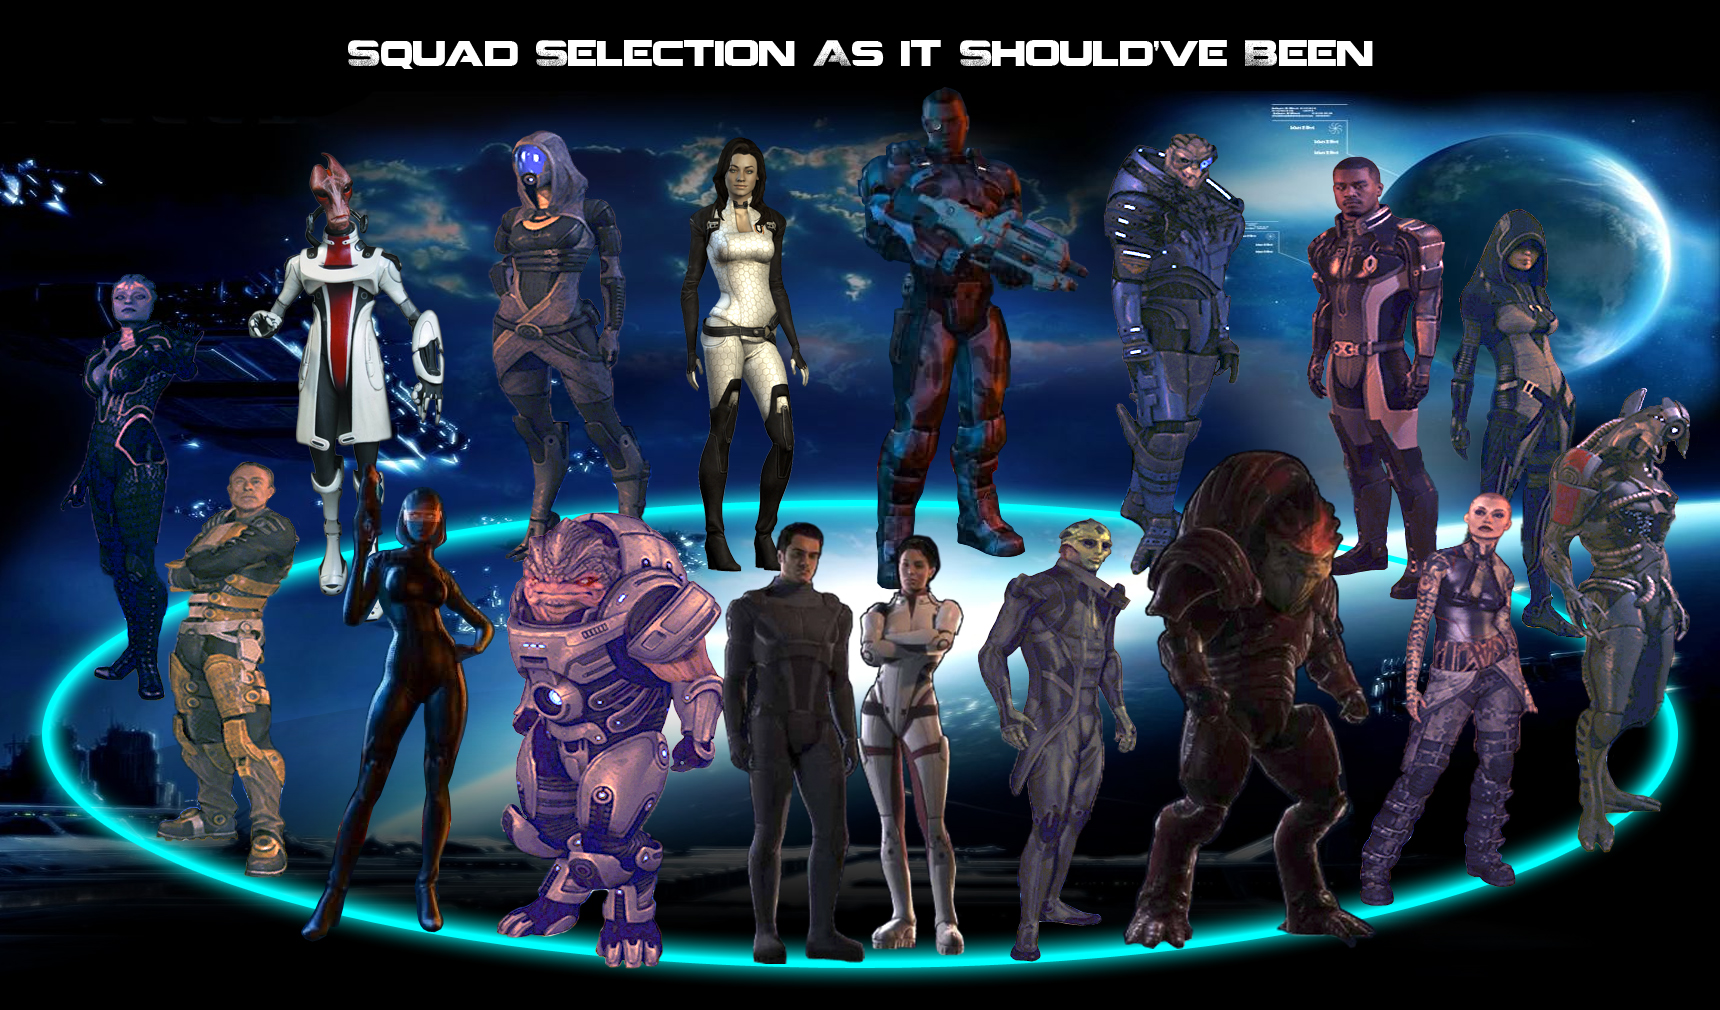 mass effect 2 characters